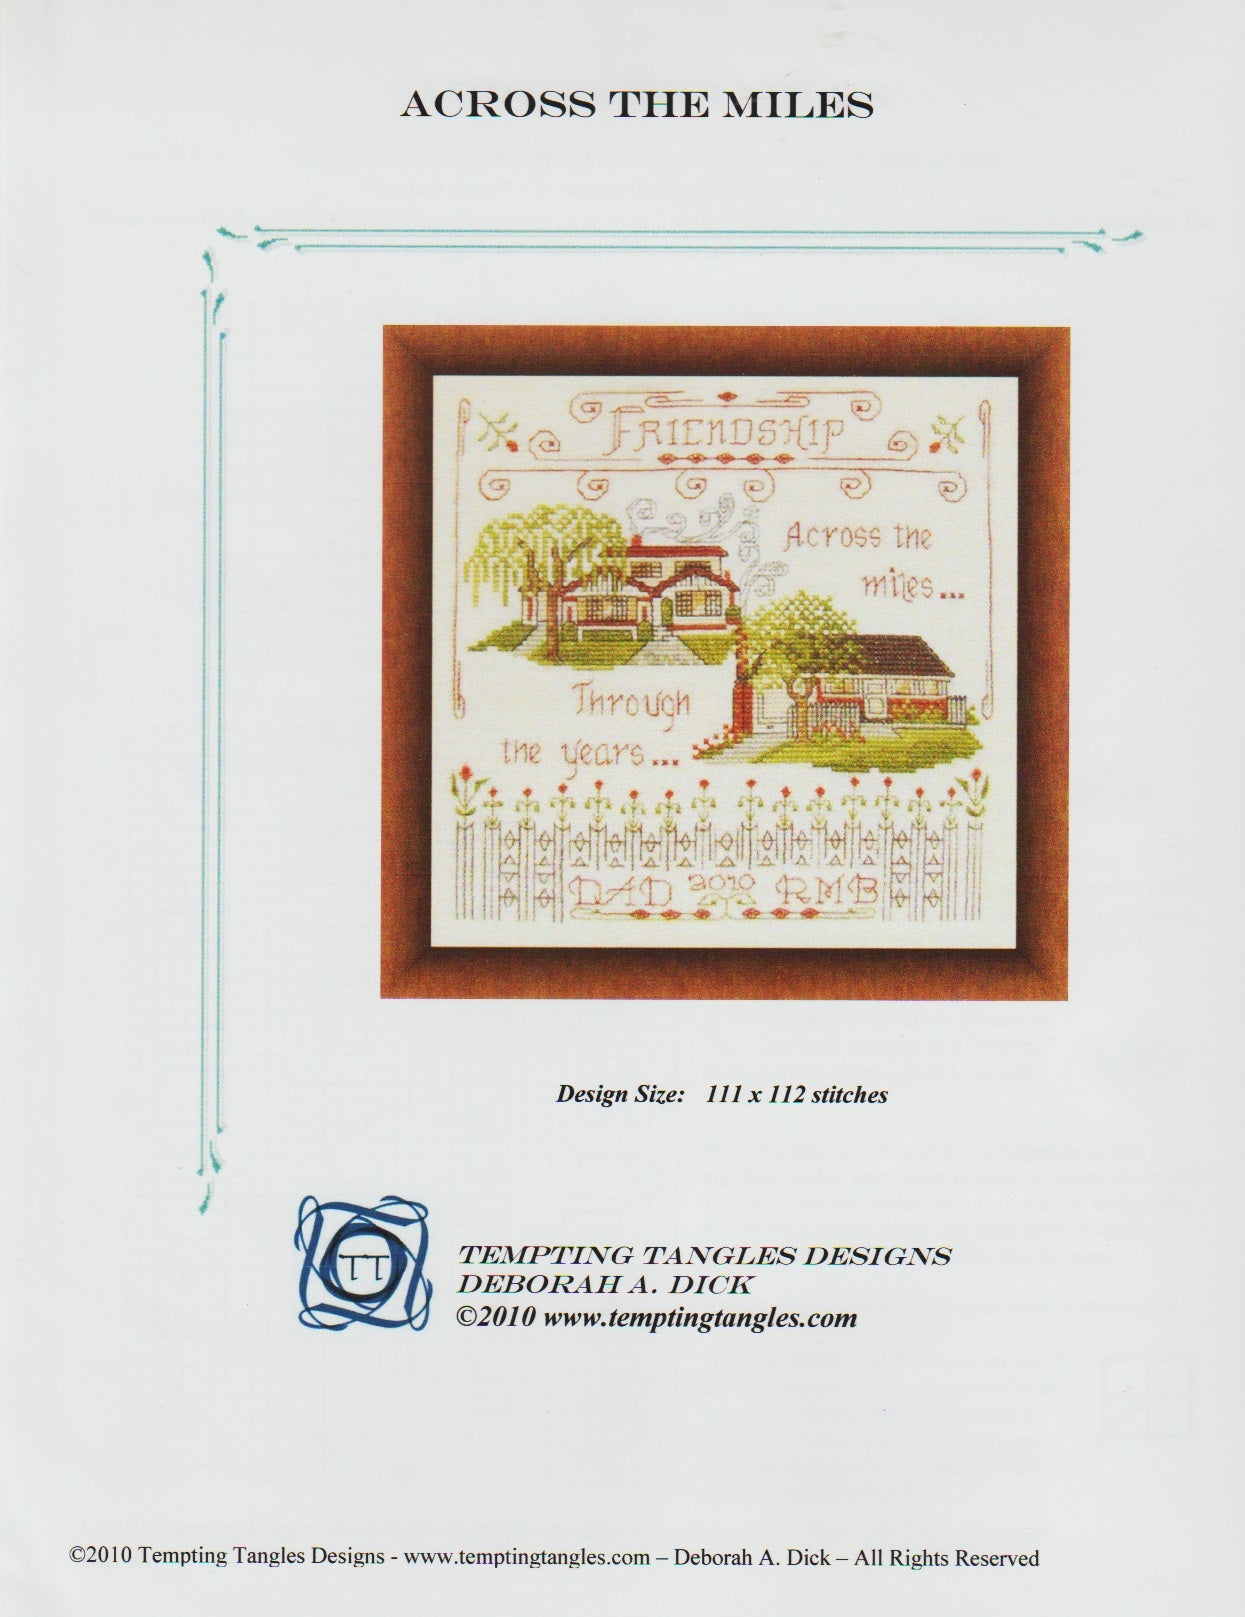 Tempting Tangle Designs Across the Miles friendship cross stitch pattern